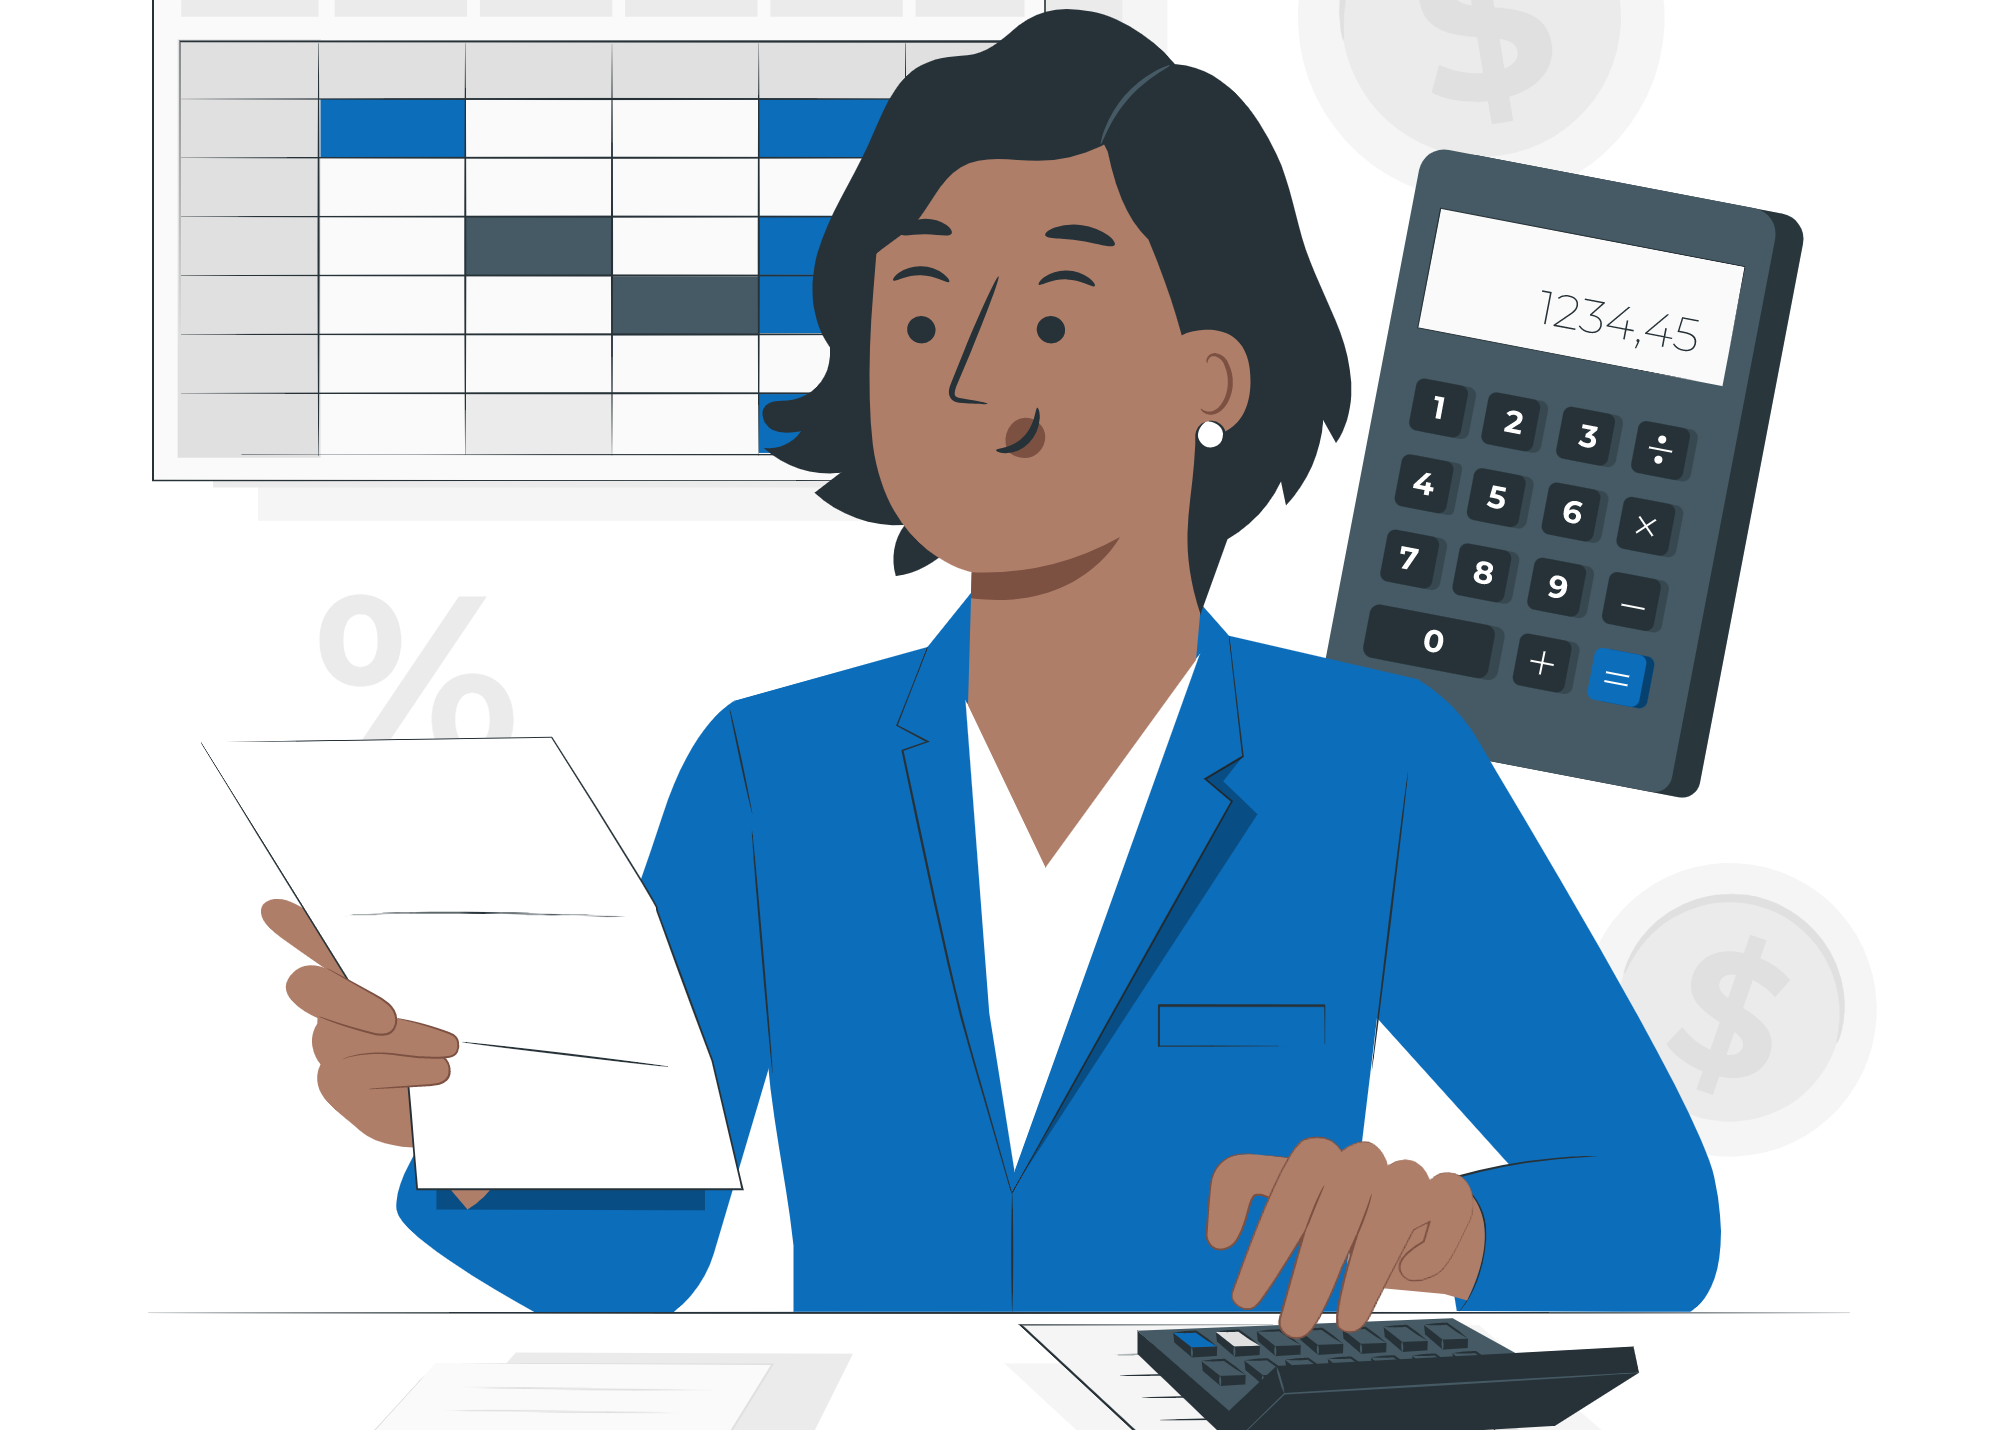 illustration of a woman calculating payroll with a calculator and physical paychecks